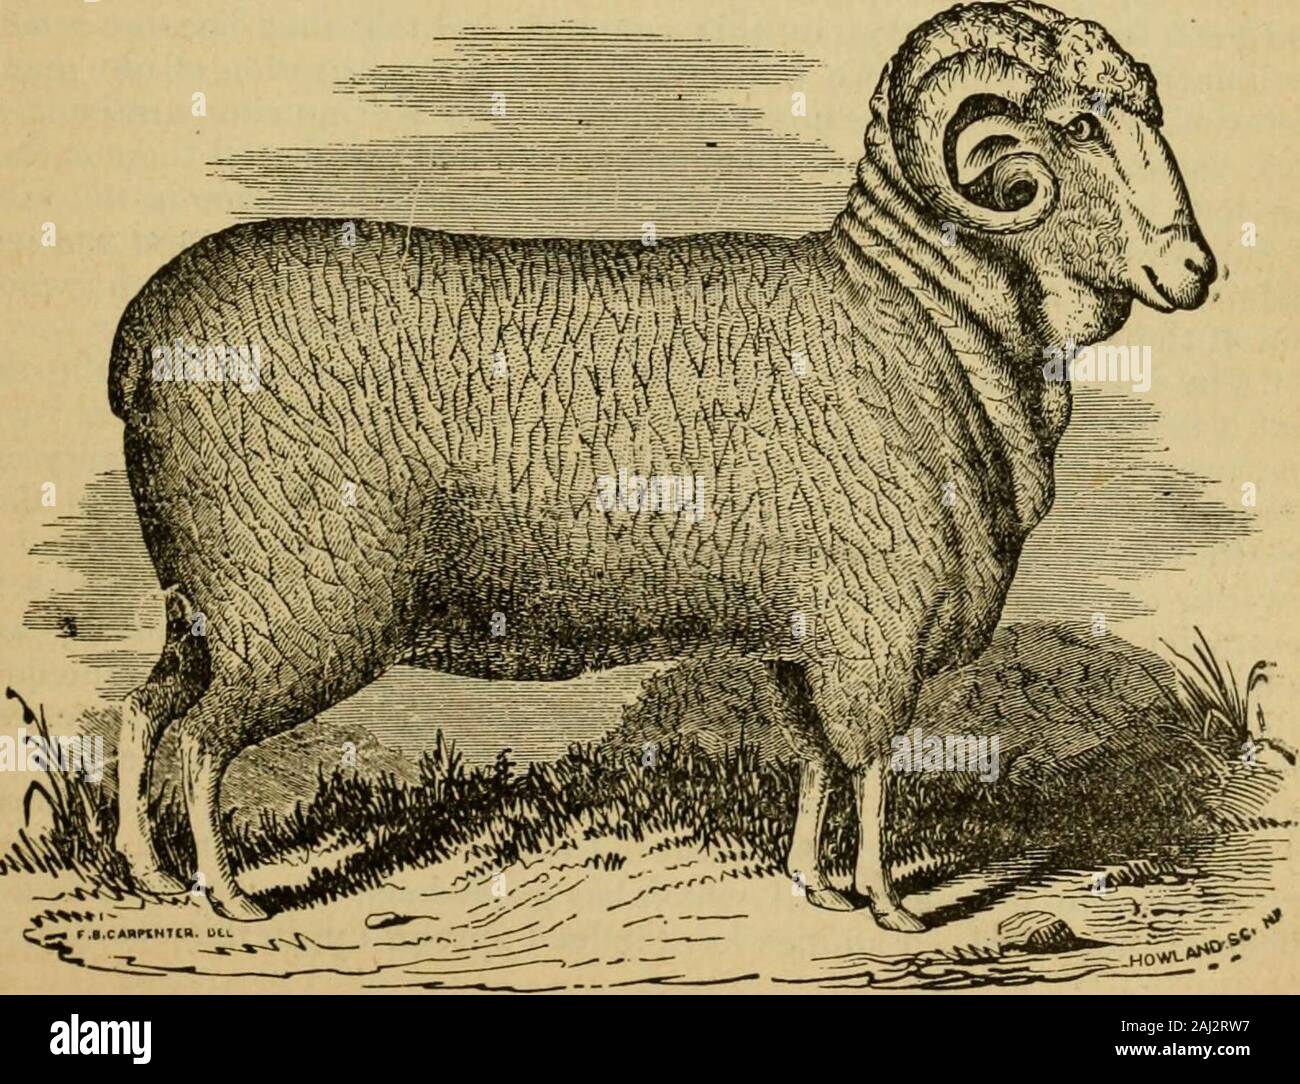 Sheep husbandry; with an account of different breeds, and general directions in regard to summer and winter management, breeding and the treatment of diseases . possibility of carding by the Tory weed ( Ci/noglossumofficinale) and Burdock (Arctium lappa) so common on new lands. The old common stock of sheep, as a distinct family, have nearly disap-])eared, having been universally crossed, to a greater or less extent, withthe foreign breeds of later introduction. The hrst and second cross withthe Merino, resulted in a decided improvement, and produced a varietyexceedingly valuable for the farme Stock Photo